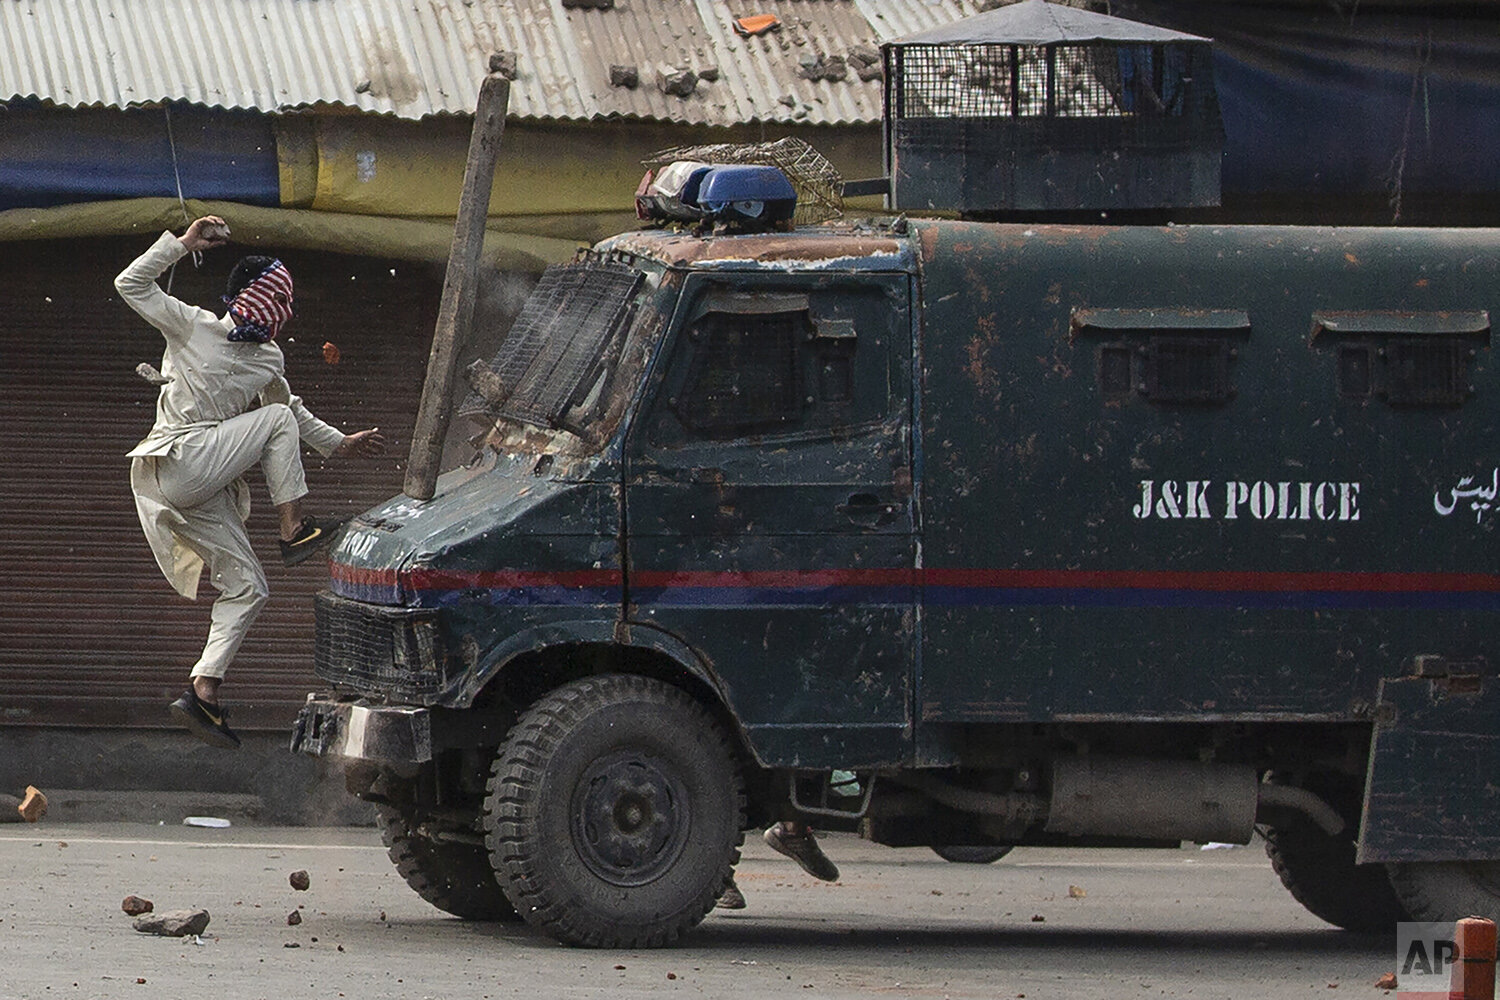  A masked Kashmiri protester jumps on the bonnet of an armored vehicle of Indian police as he throws stones at it during a protest in Srinagar, Indian controlled Kashmir, May 31, 2019. (AP Photo/Dar Yasin) 